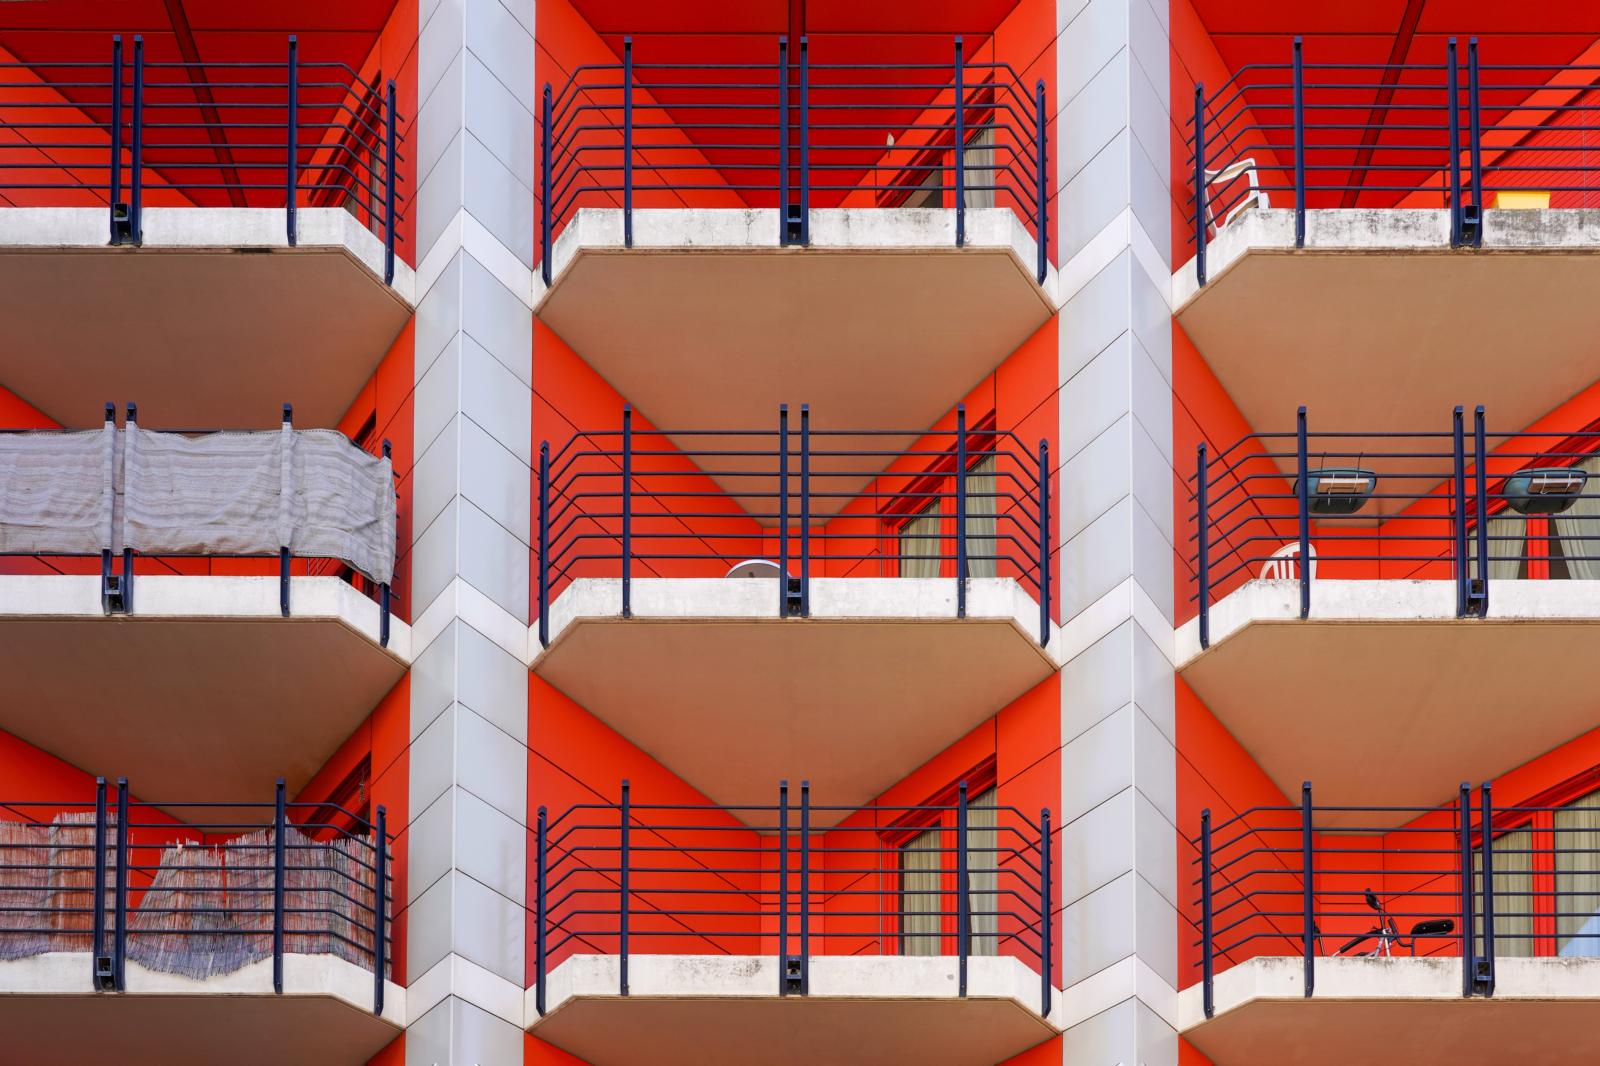 Vibrant Verticality: Geometric Living | Buy this image